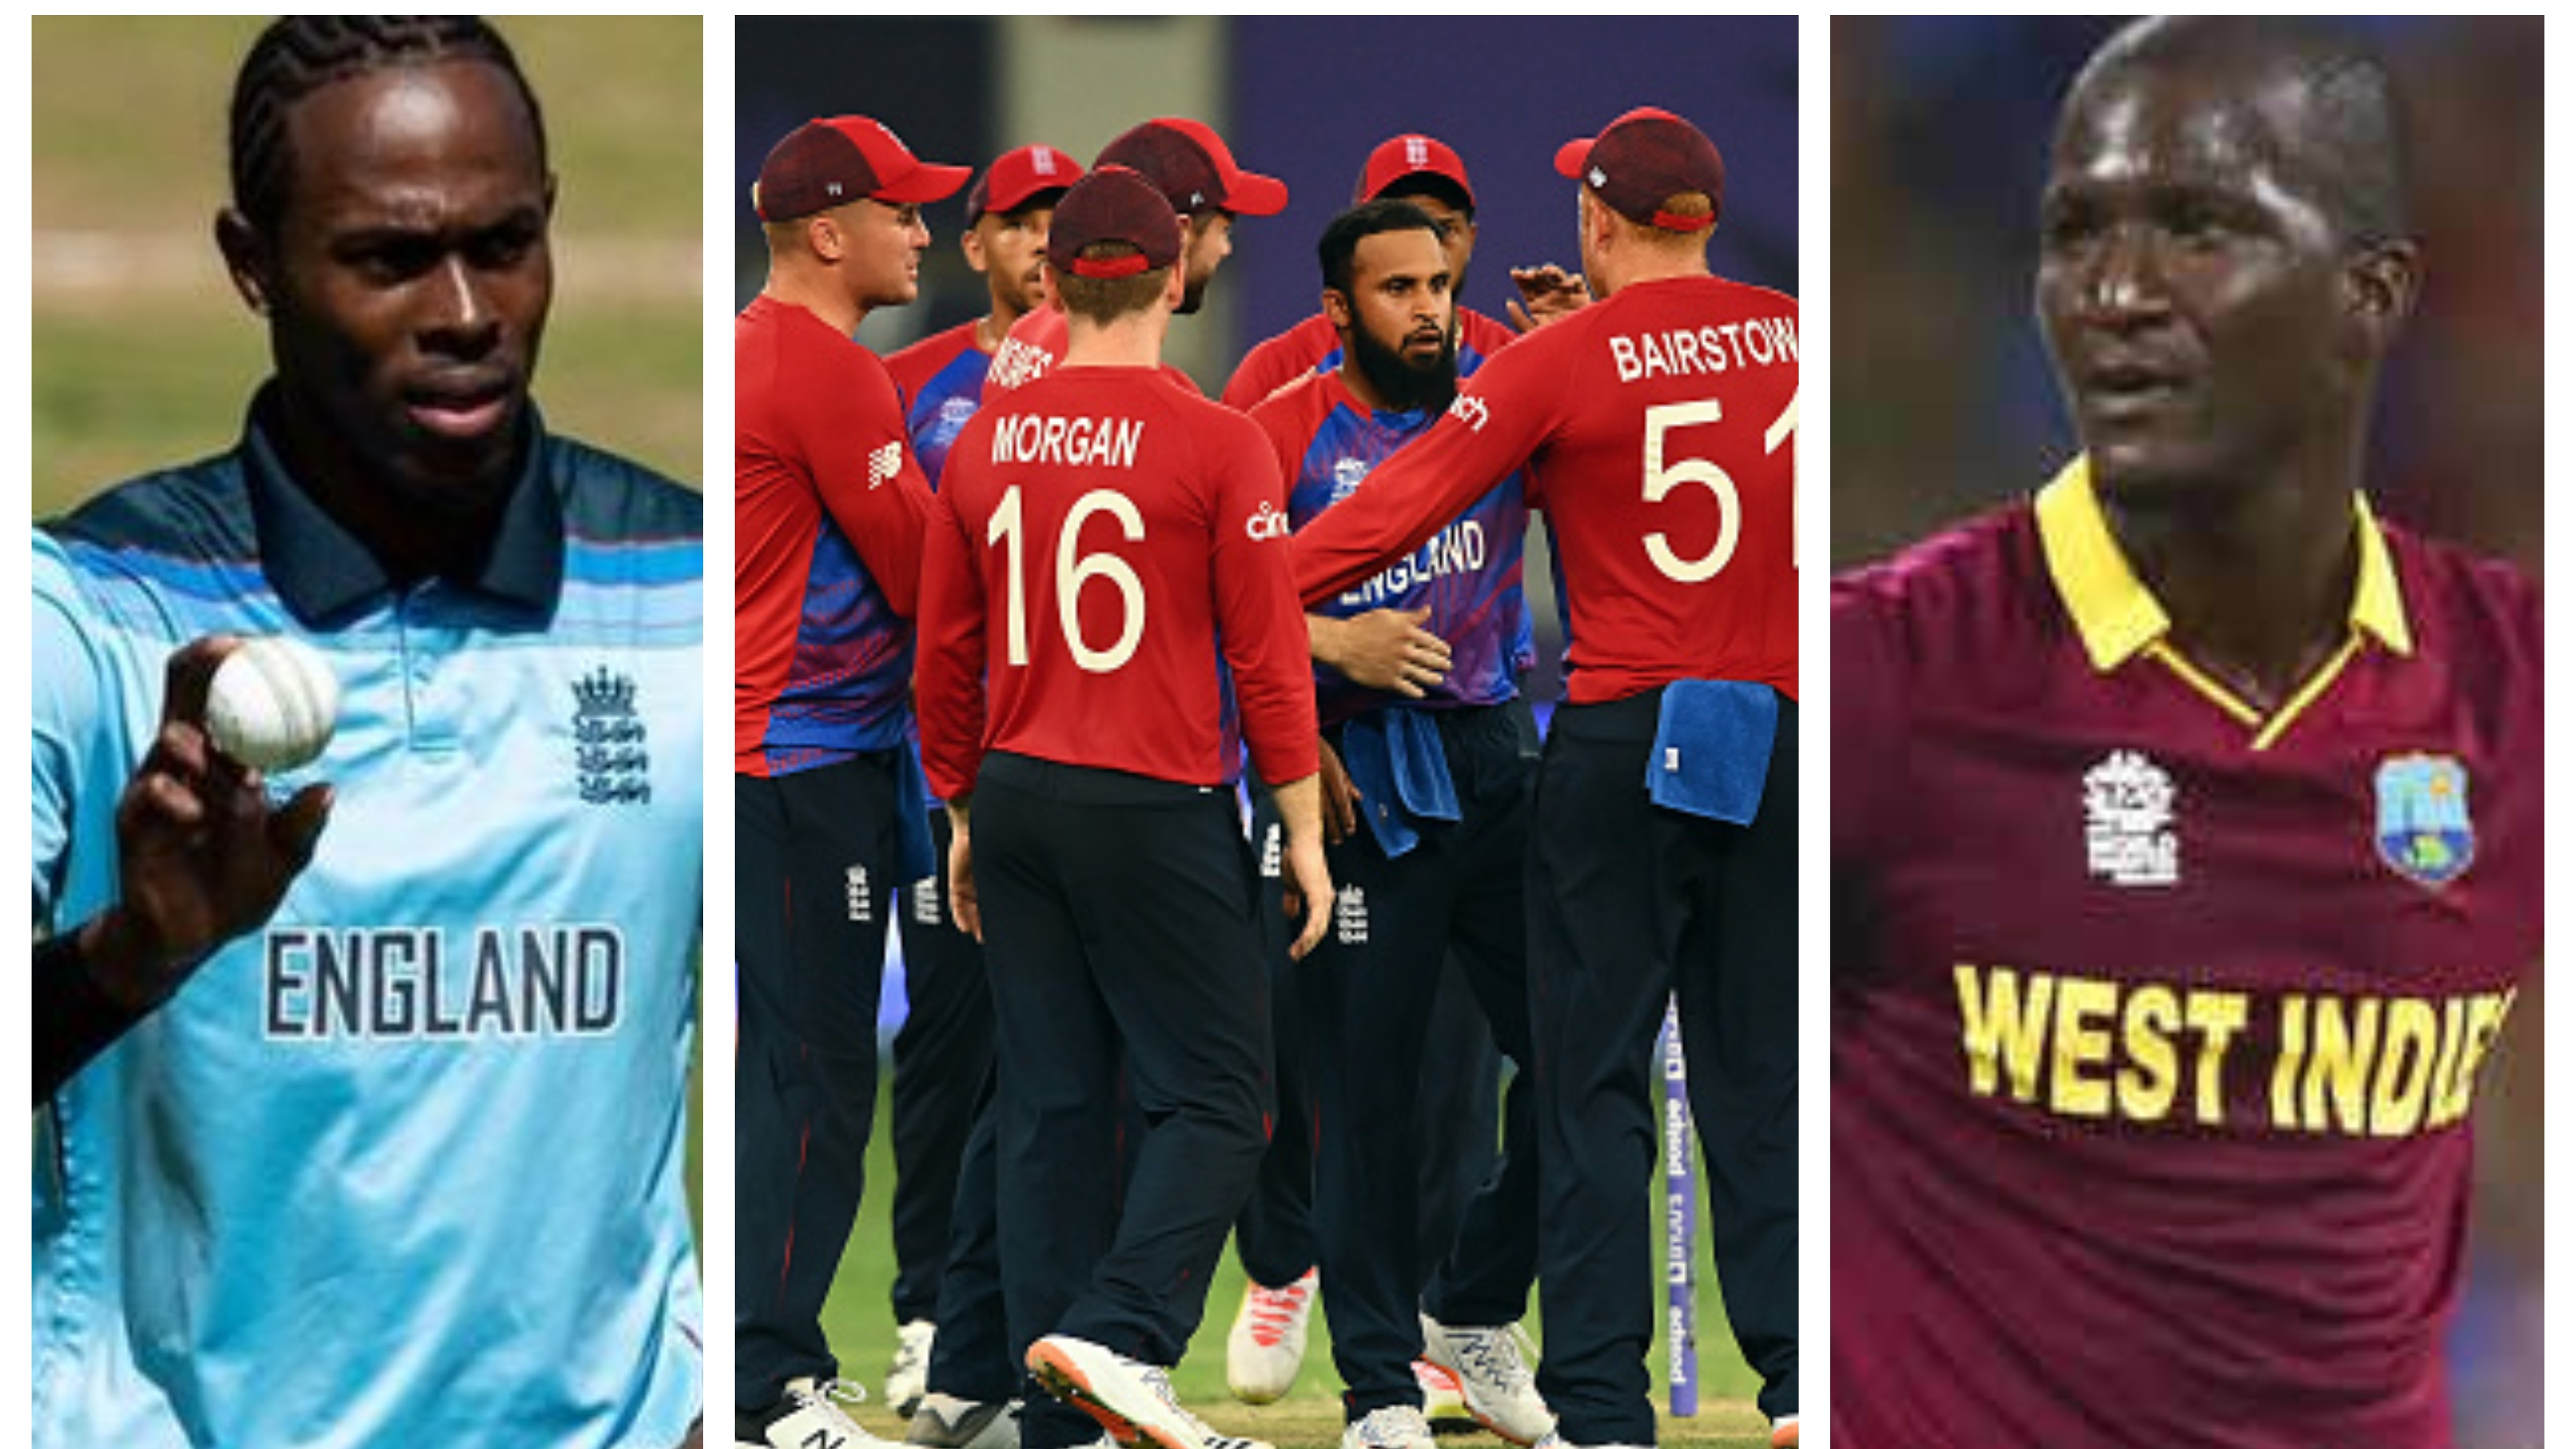 T20 World Cup 2021: Cricket fraternity reacts as England bundle out West Indies for a mere 55